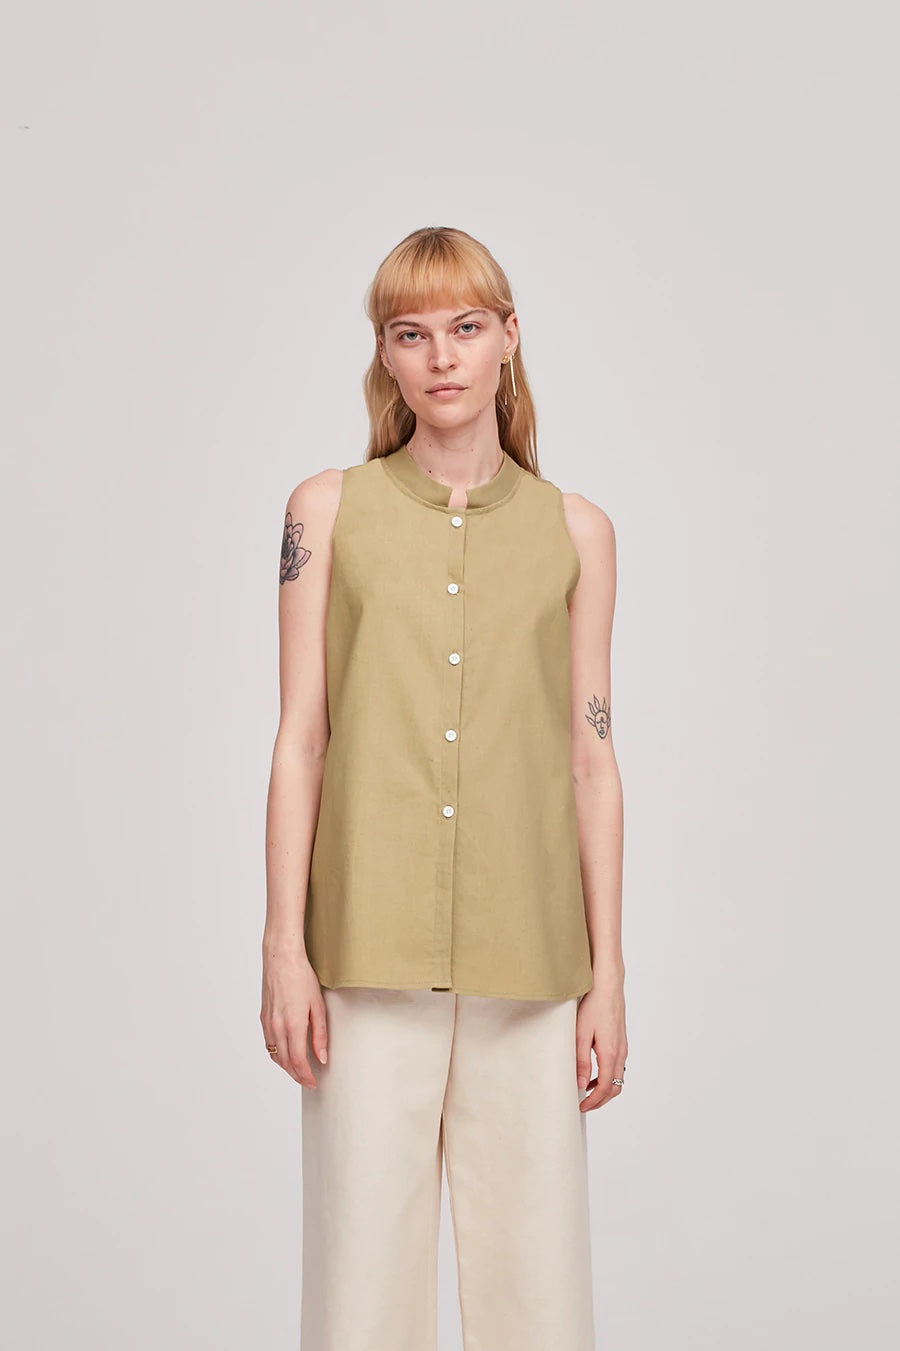 Woman wearing the Cara Top sewing pattern from The Modern Sewing Co on The Fold Line. A sleeveless top pattern made in poplin, muslin, Tencel or silk fabrics, featuring a square officer collar, front button closure, small bust darts and gentle A-line silh